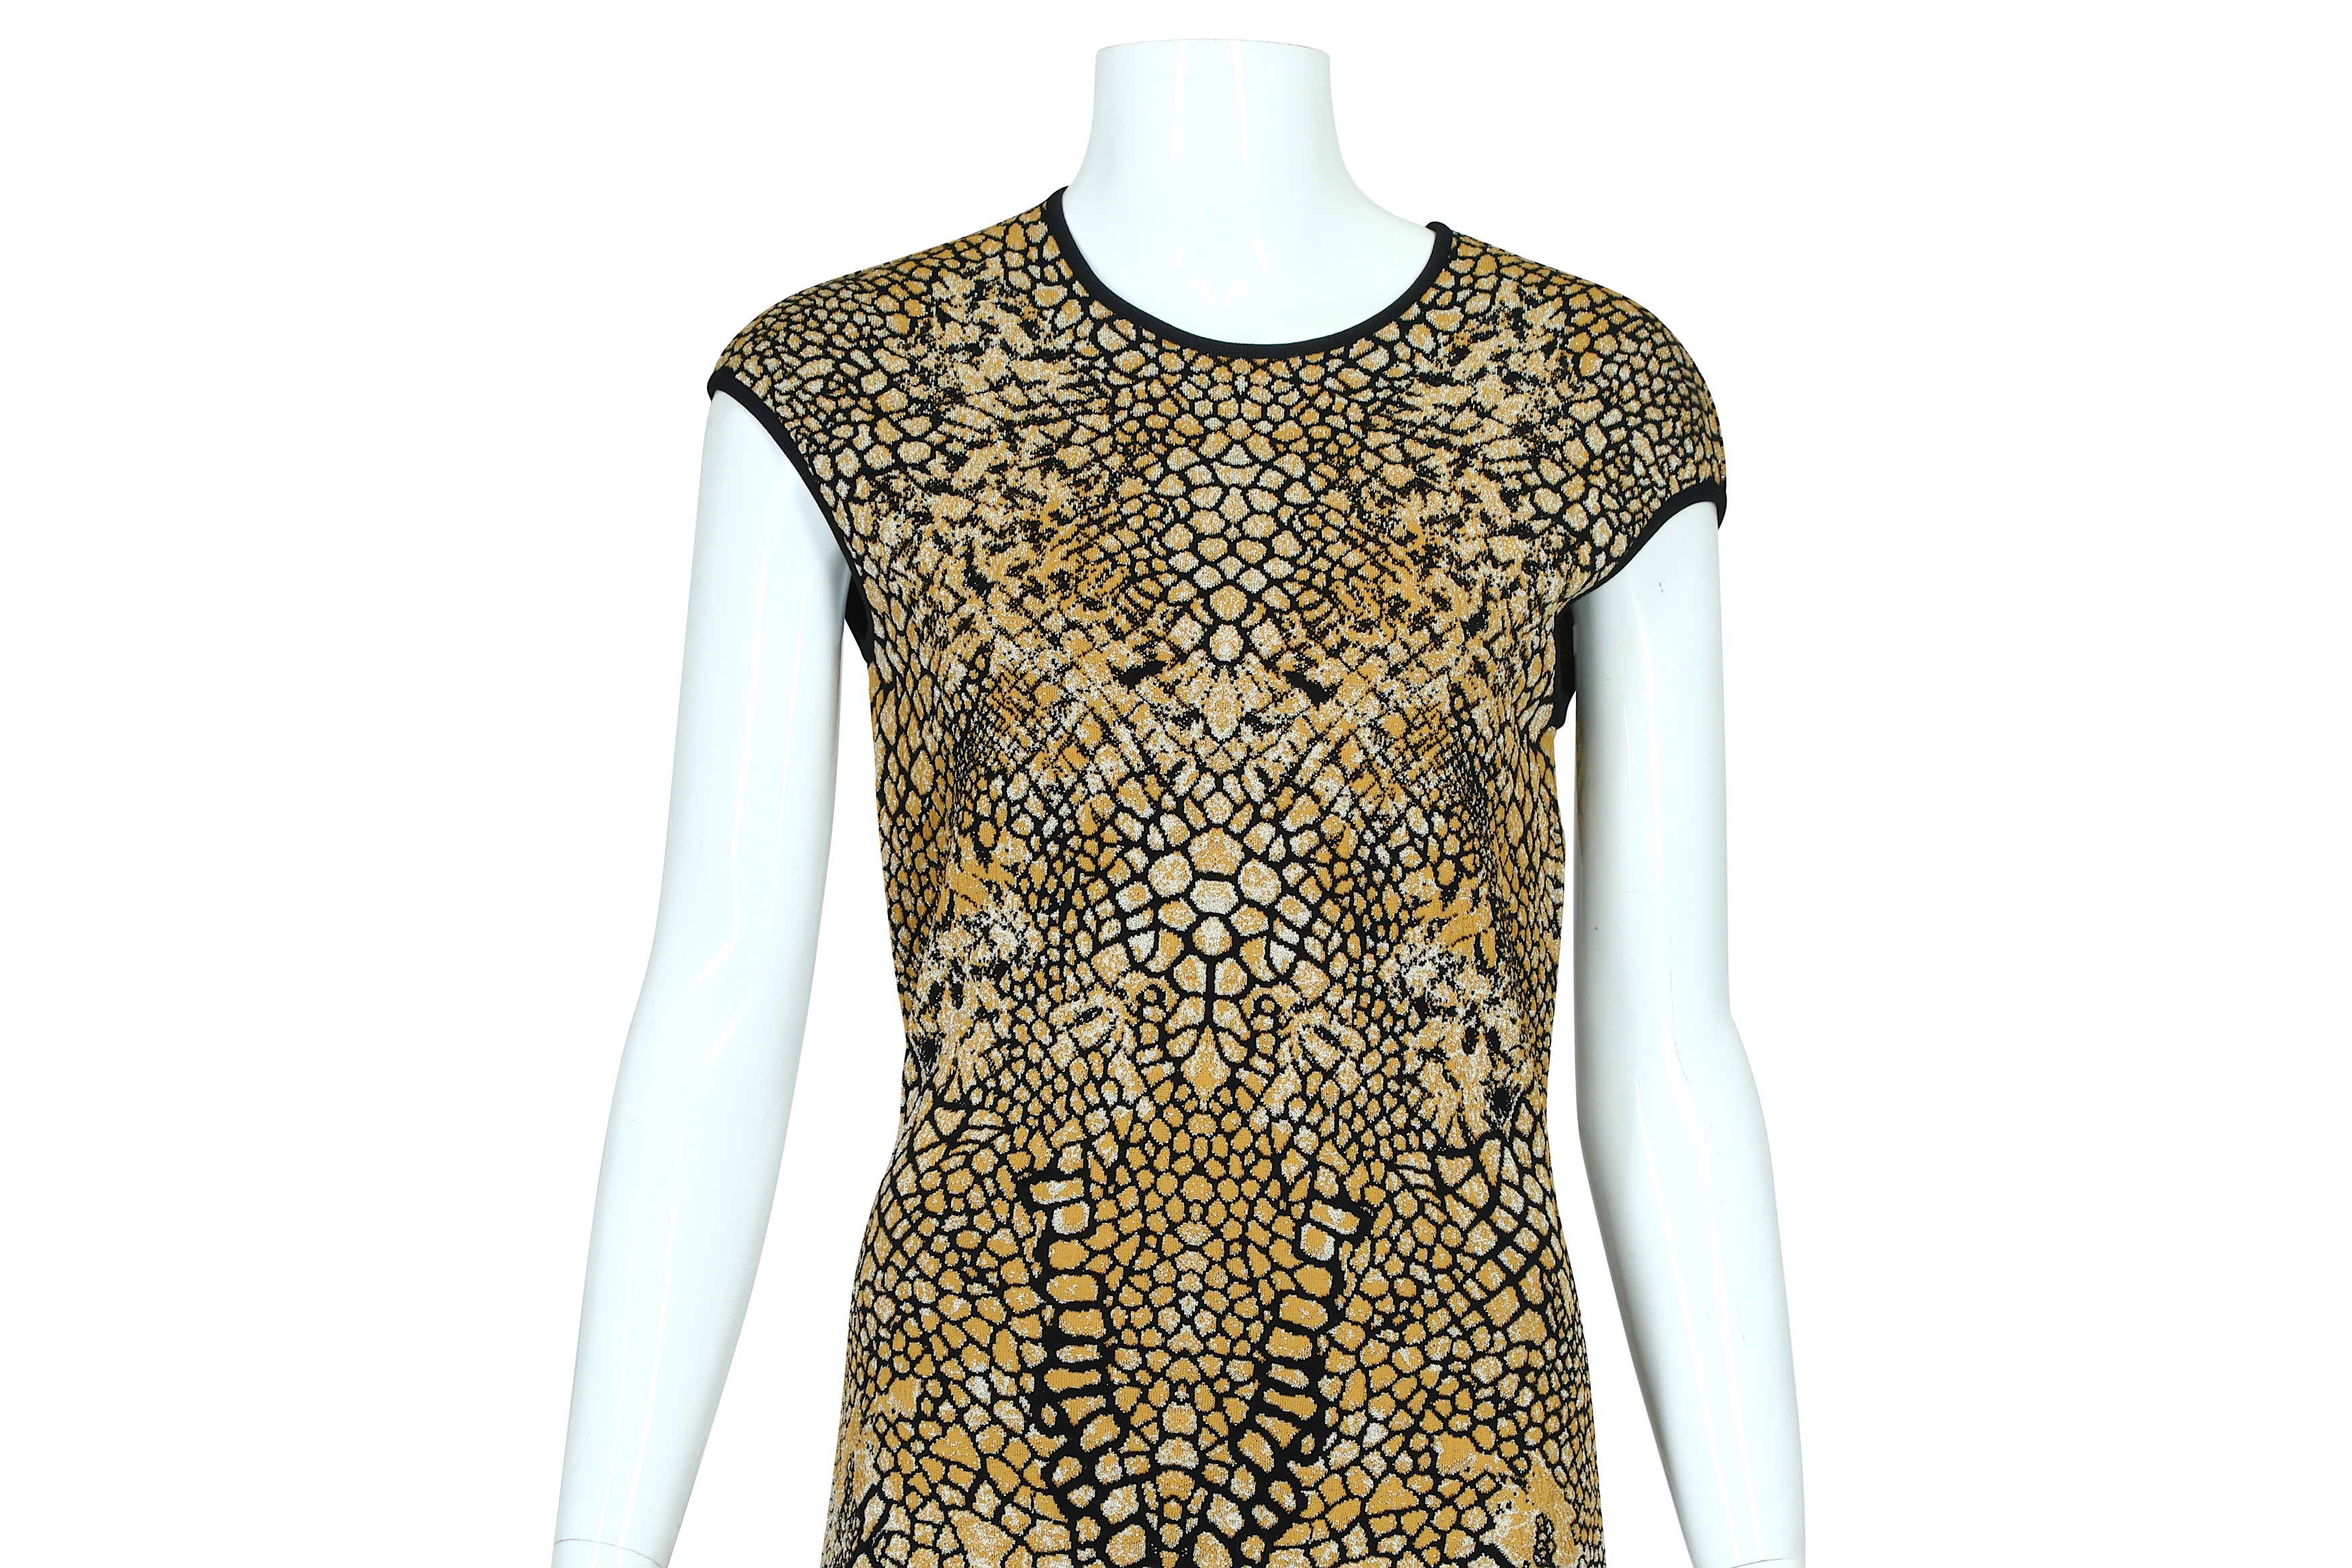 Alexander McQueen Stretch Knit Black and Gold Dress - Image 2 of 4